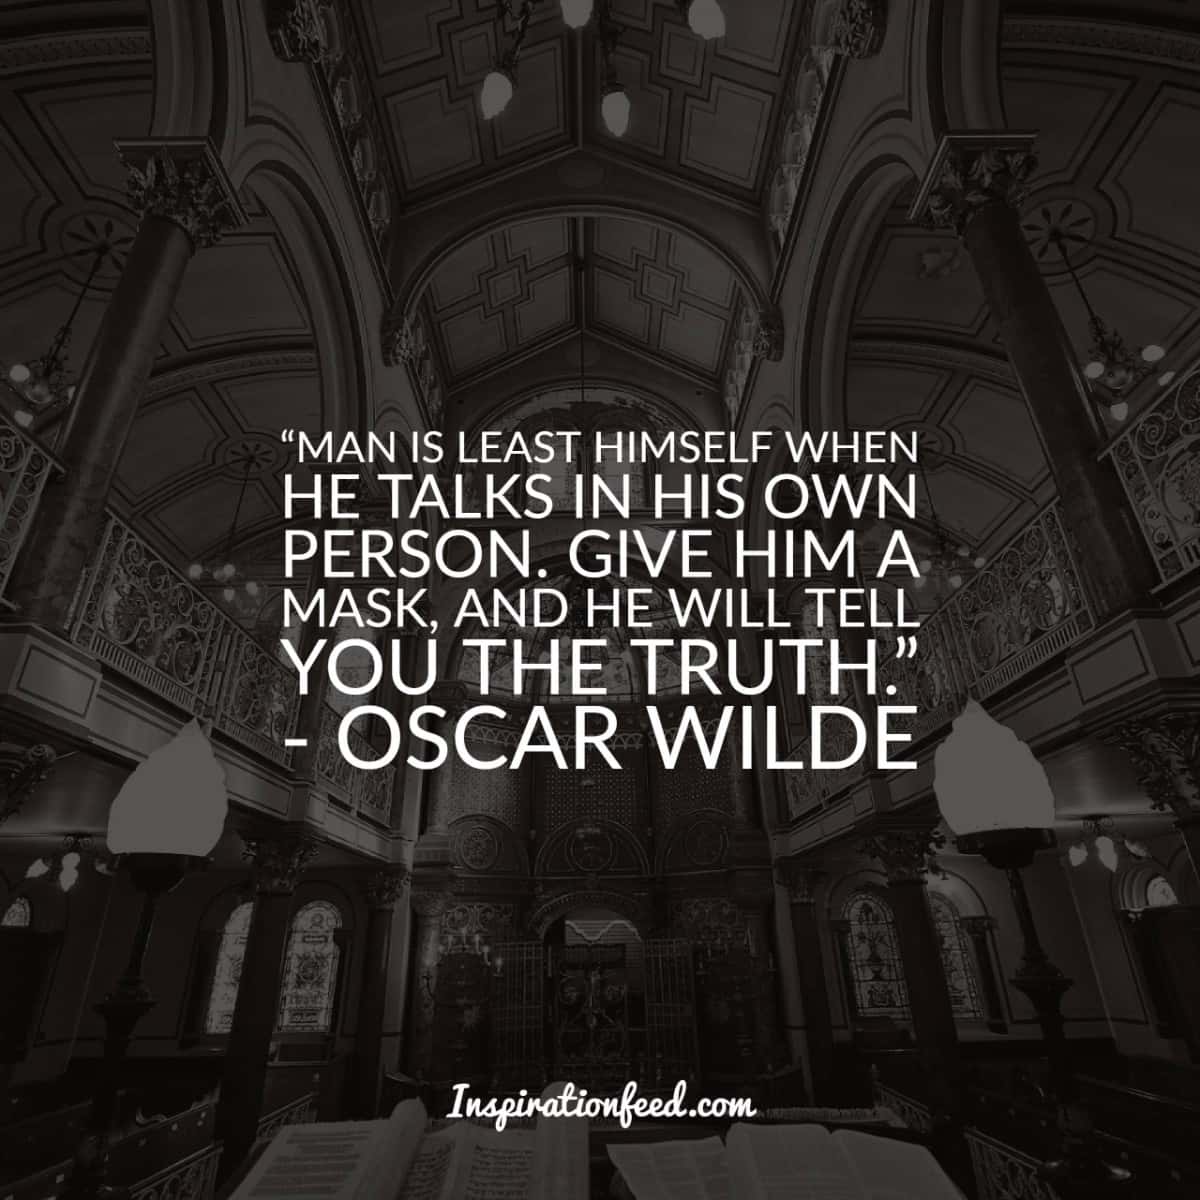 30 Oscar Wilde Quotes About Beauty And Life - Inspirationfeed